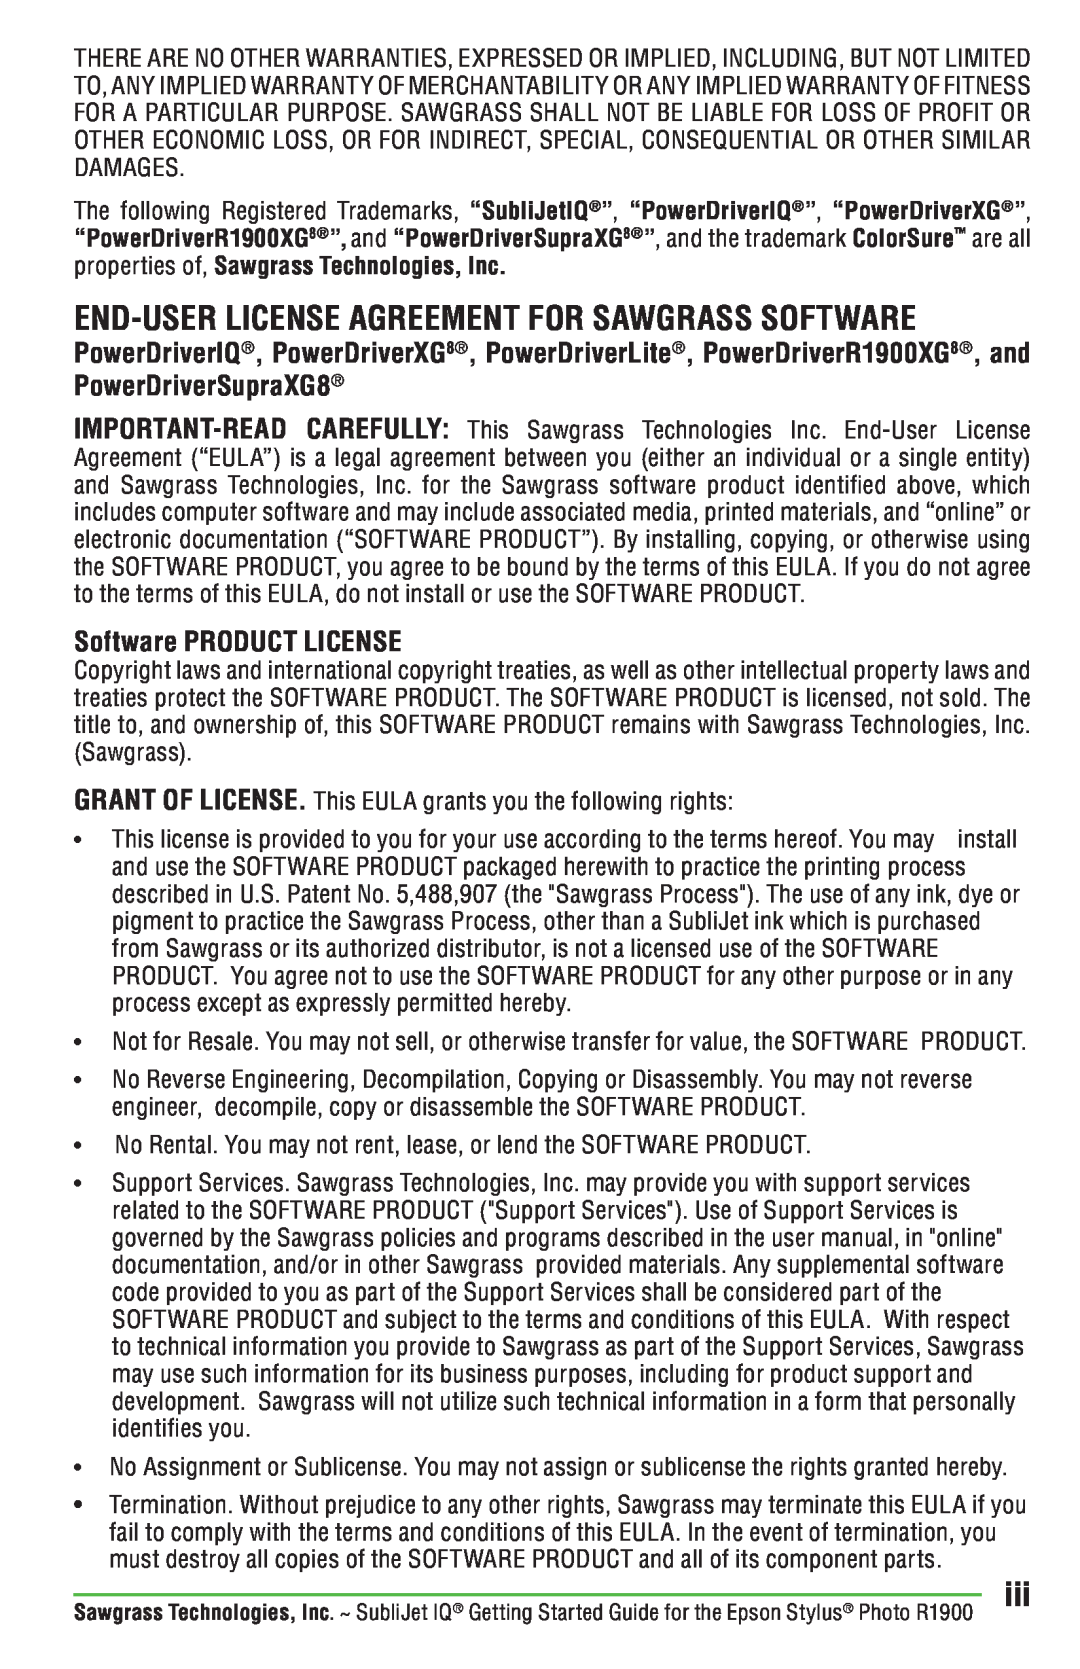 Epson R1900 manual End-User License Agreement For Sawgrass Software, Software PRODUCT LICENSE 